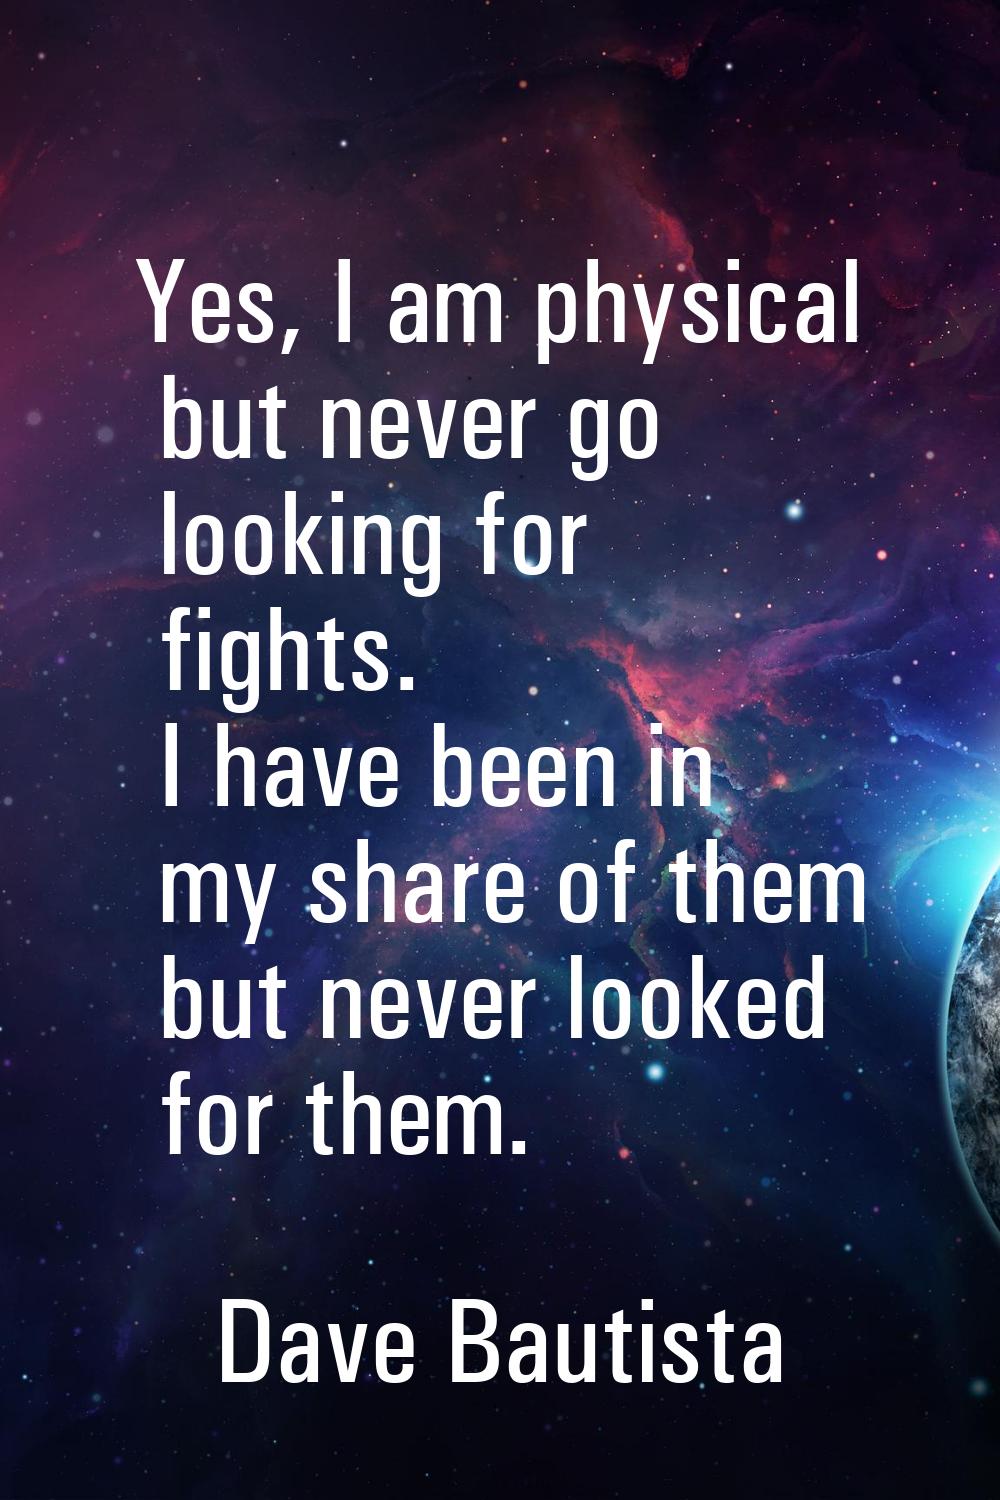 Yes, I am physical but never go looking for fights. I have been in my share of them but never looke